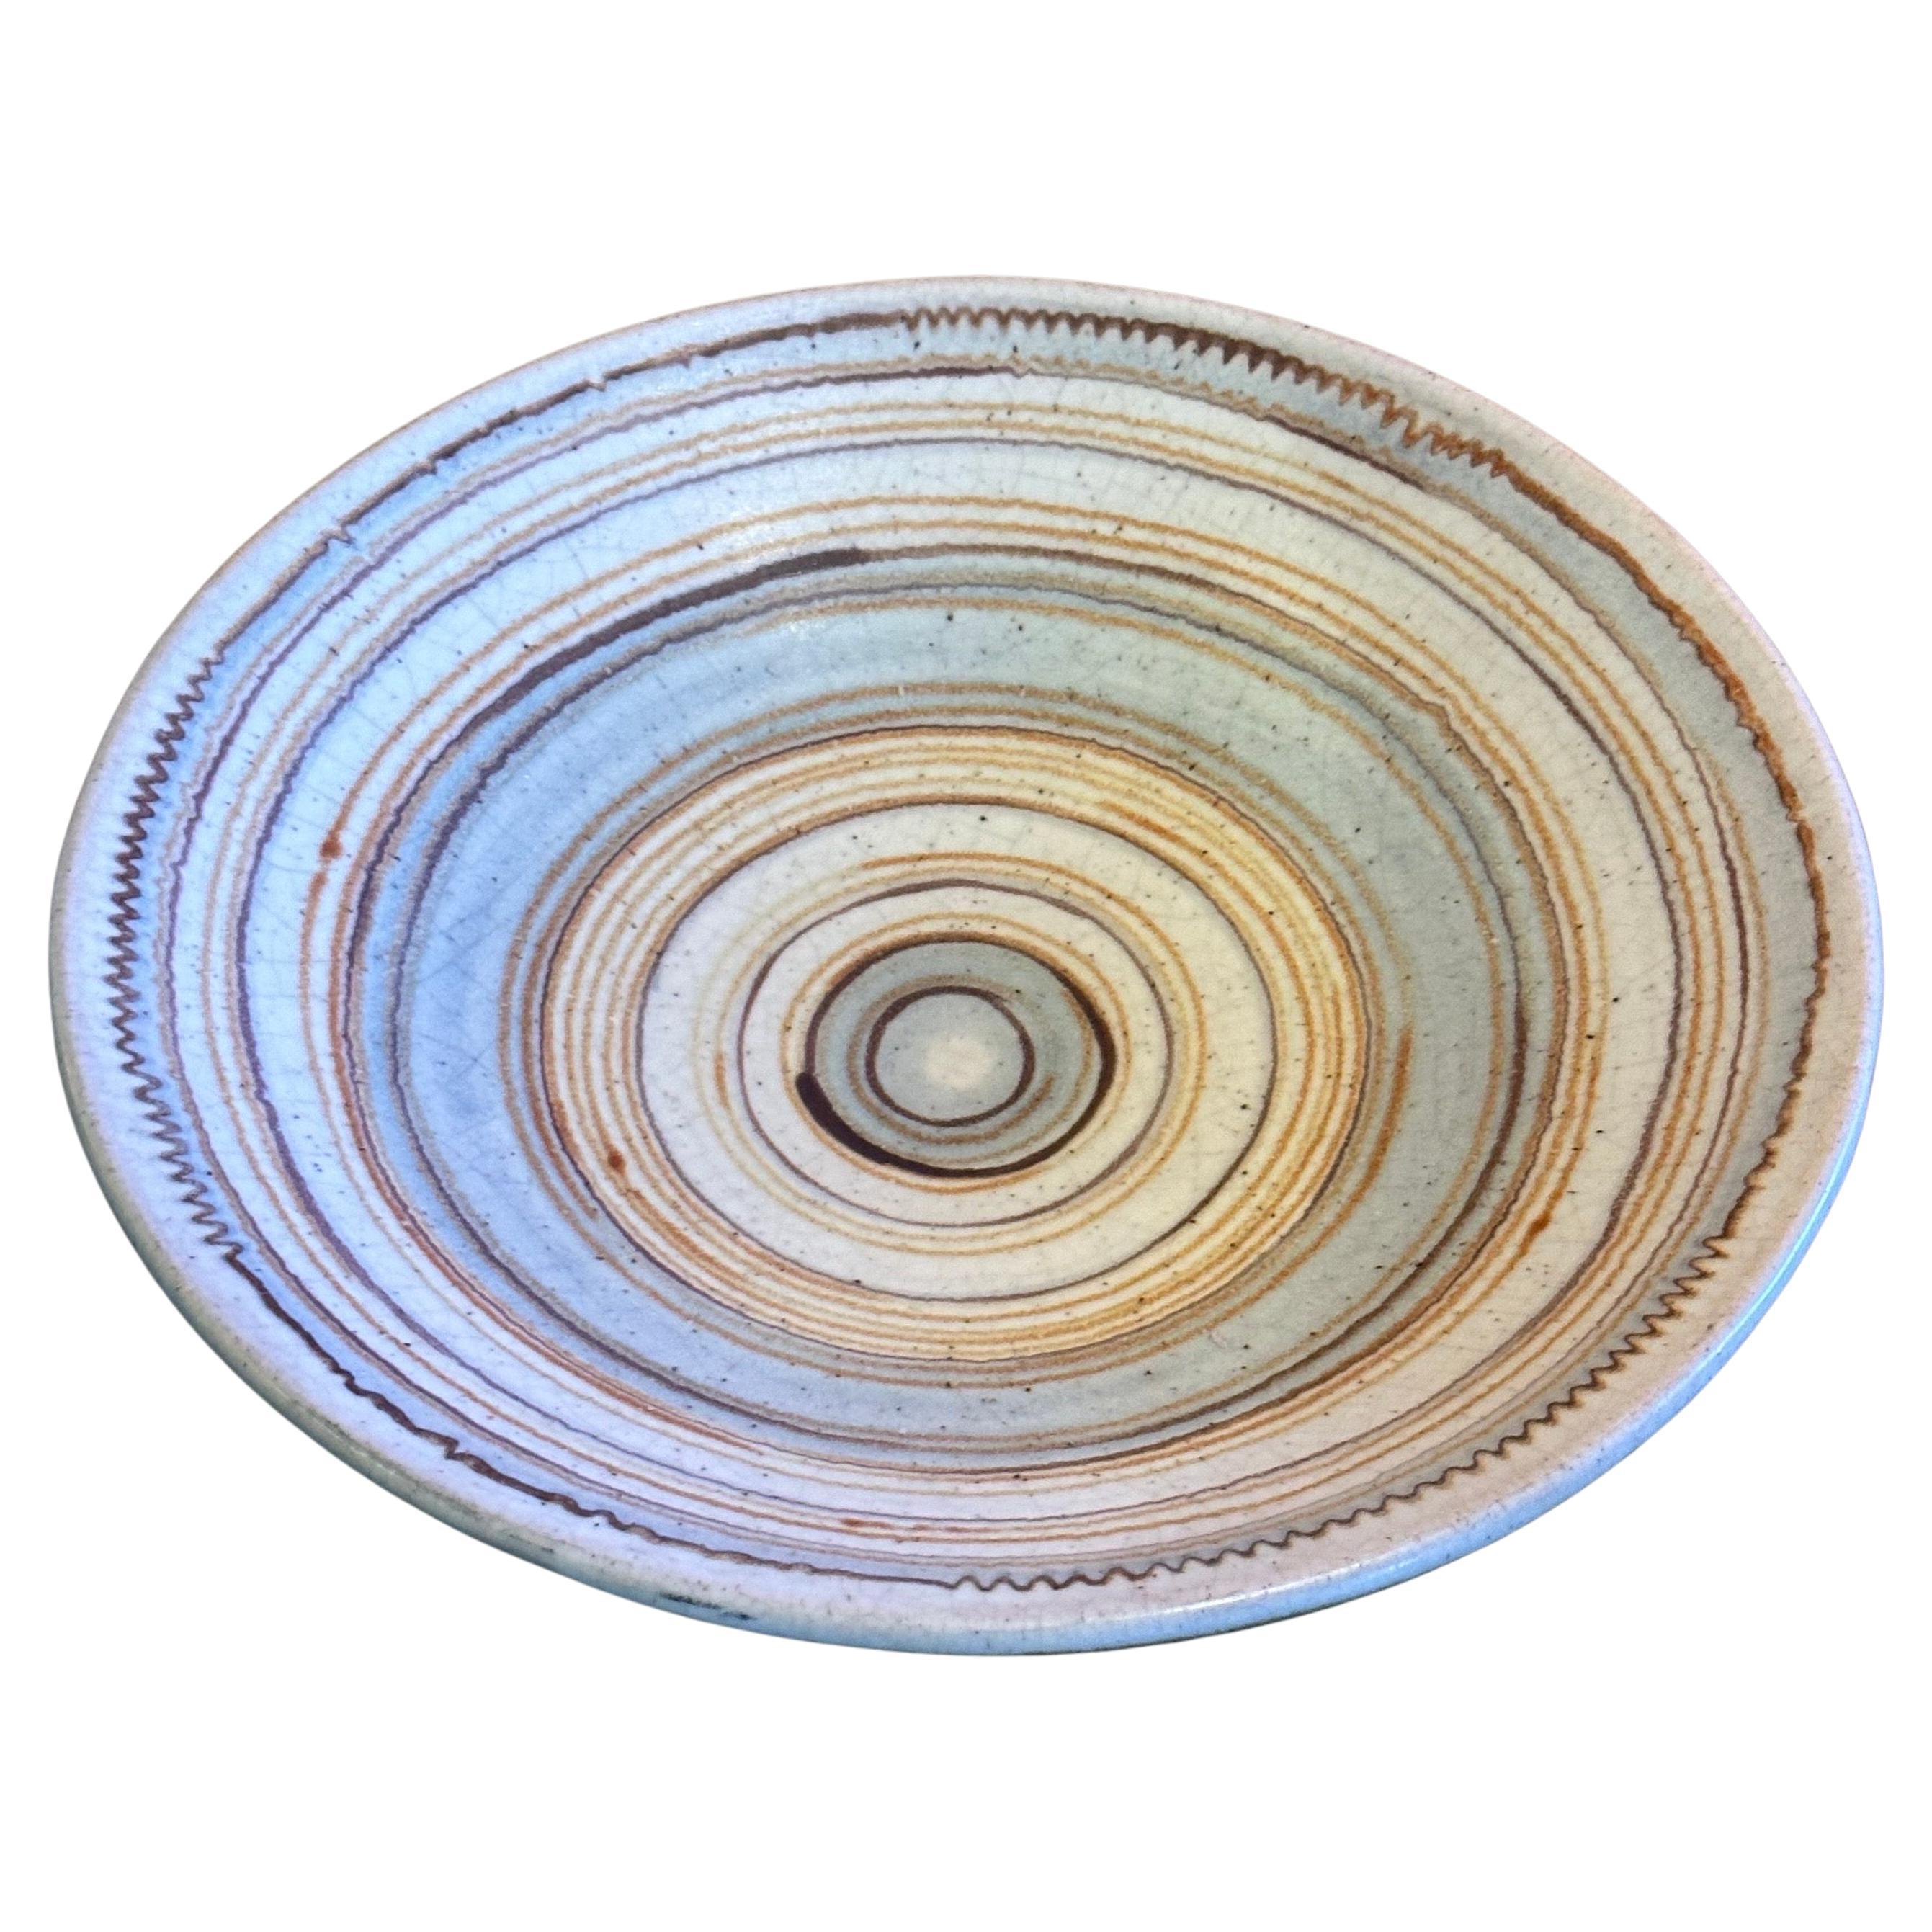 Monumental Gulfstream Line Stoneware Bowl by Fong Chow for Glidden